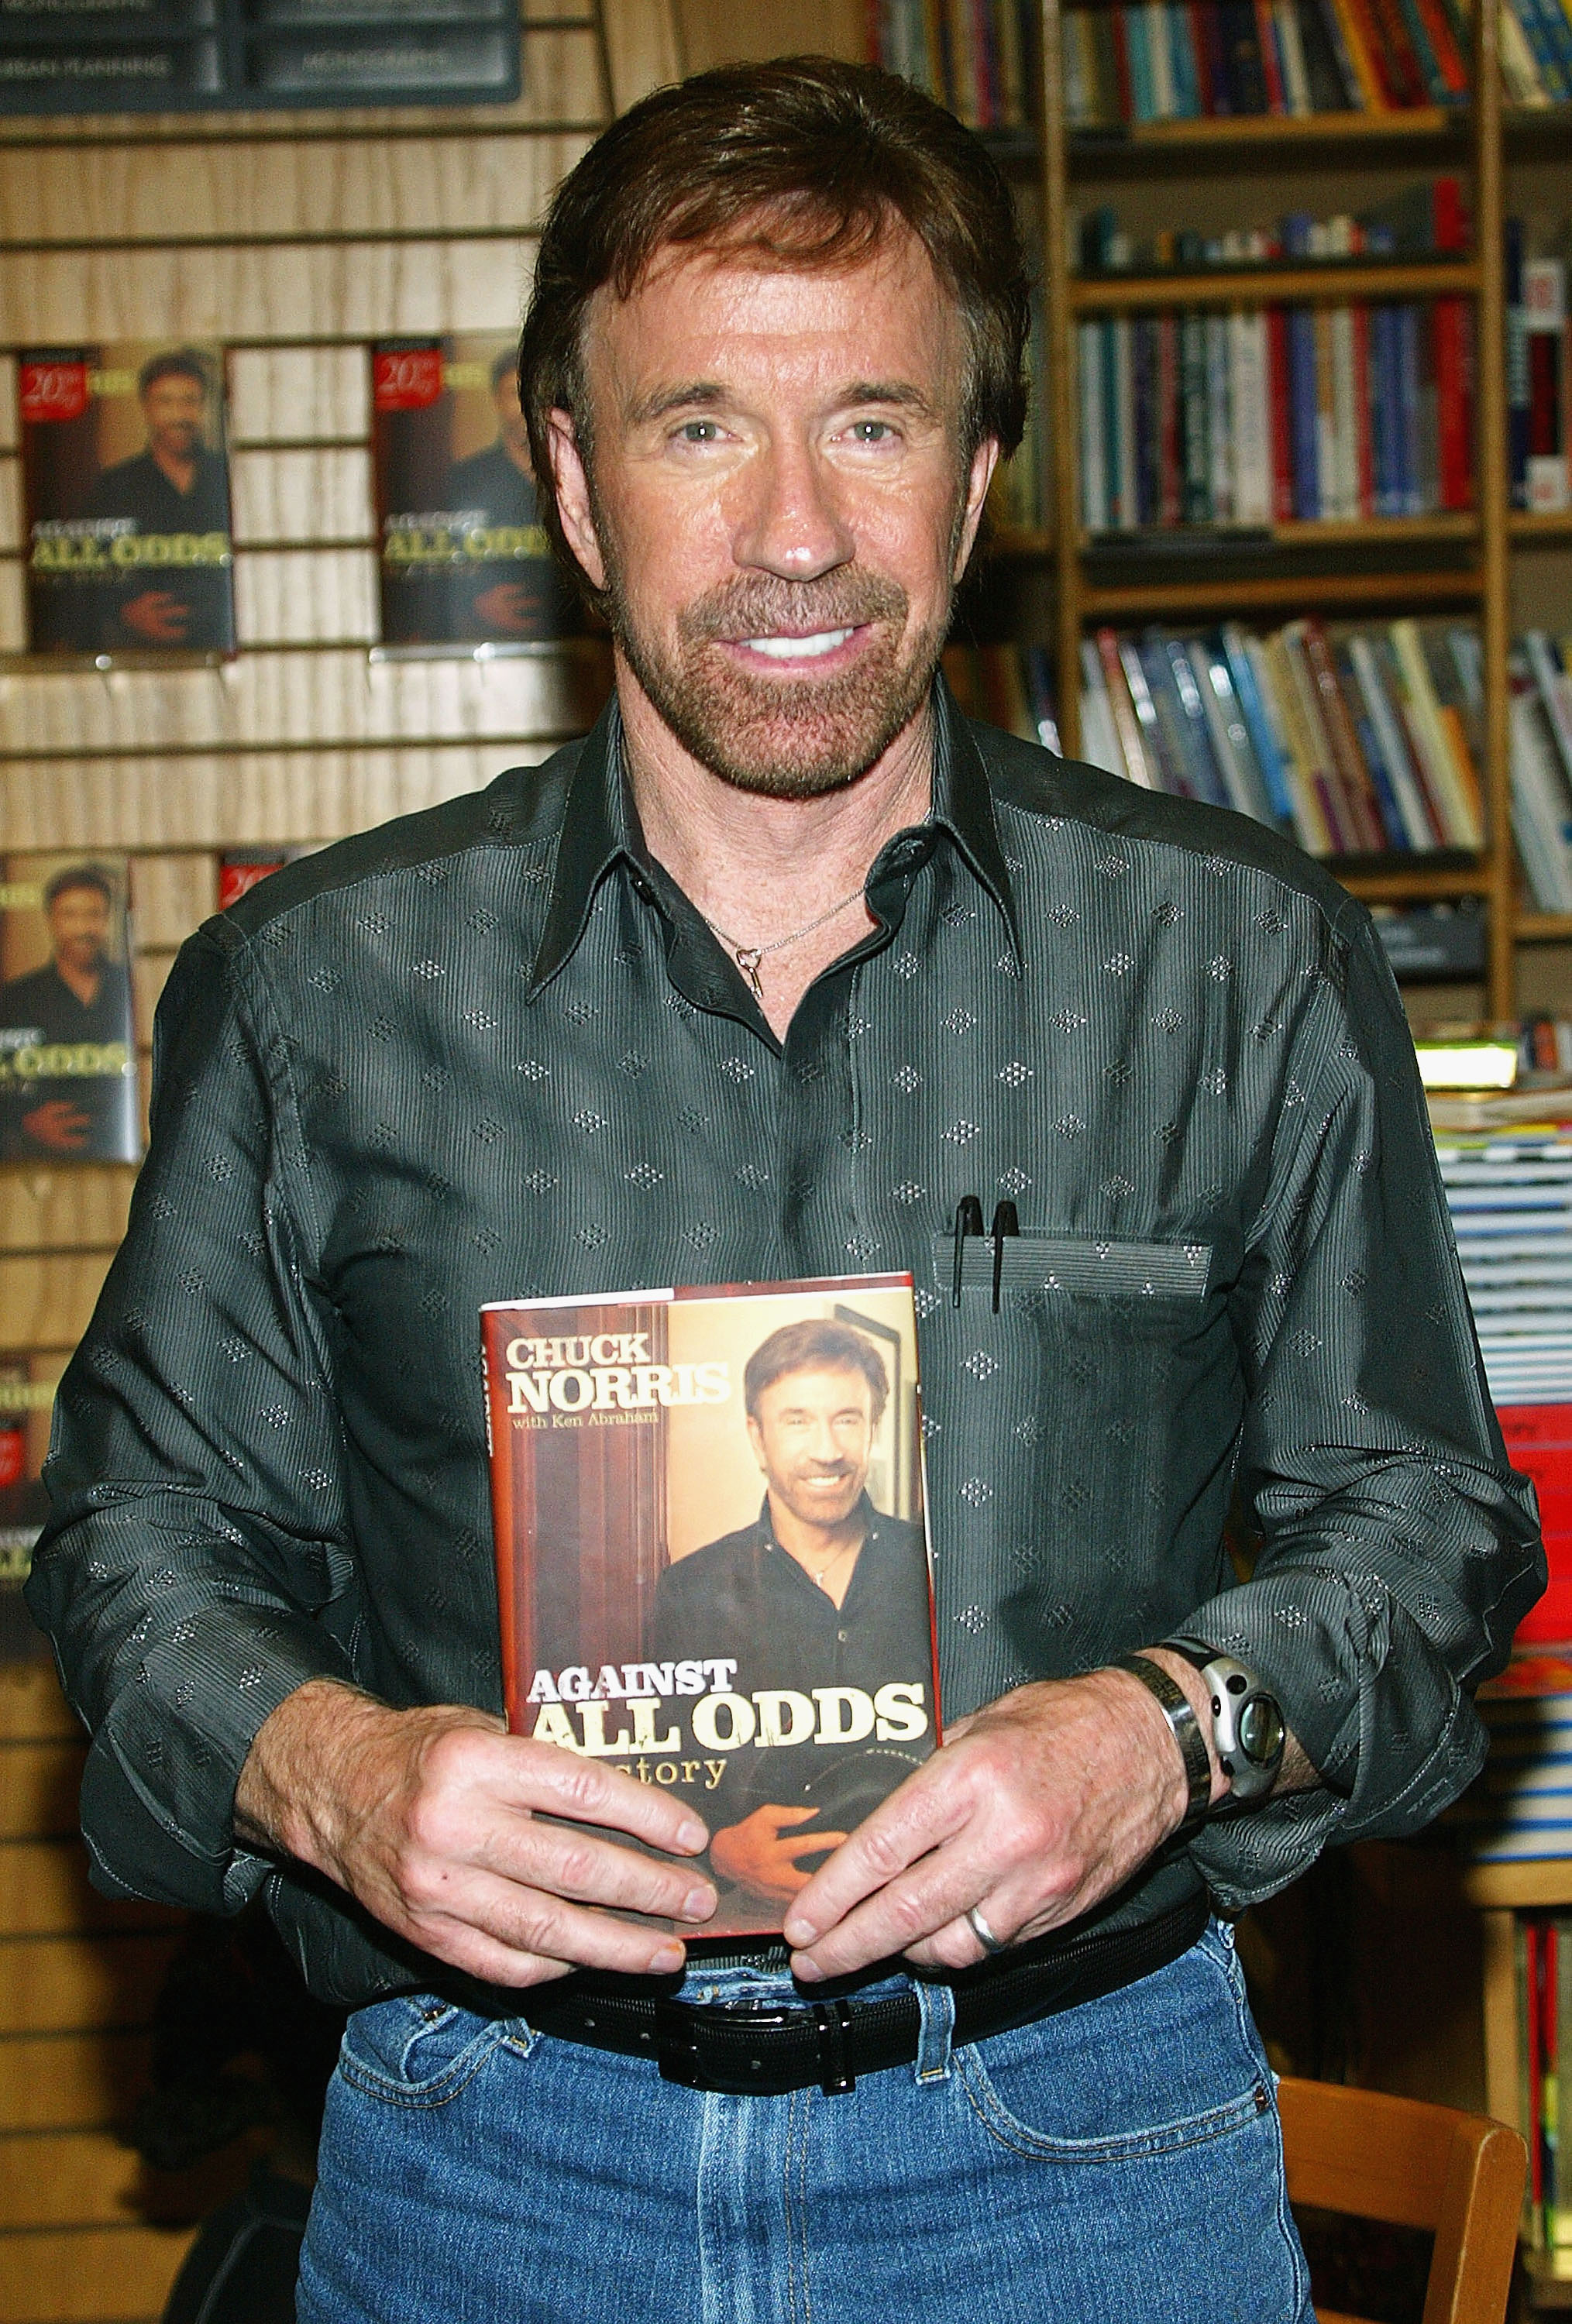 Walker Texas Ranger Actor Apogee Of Toughness Chuck Norris Turns 80 Years Old